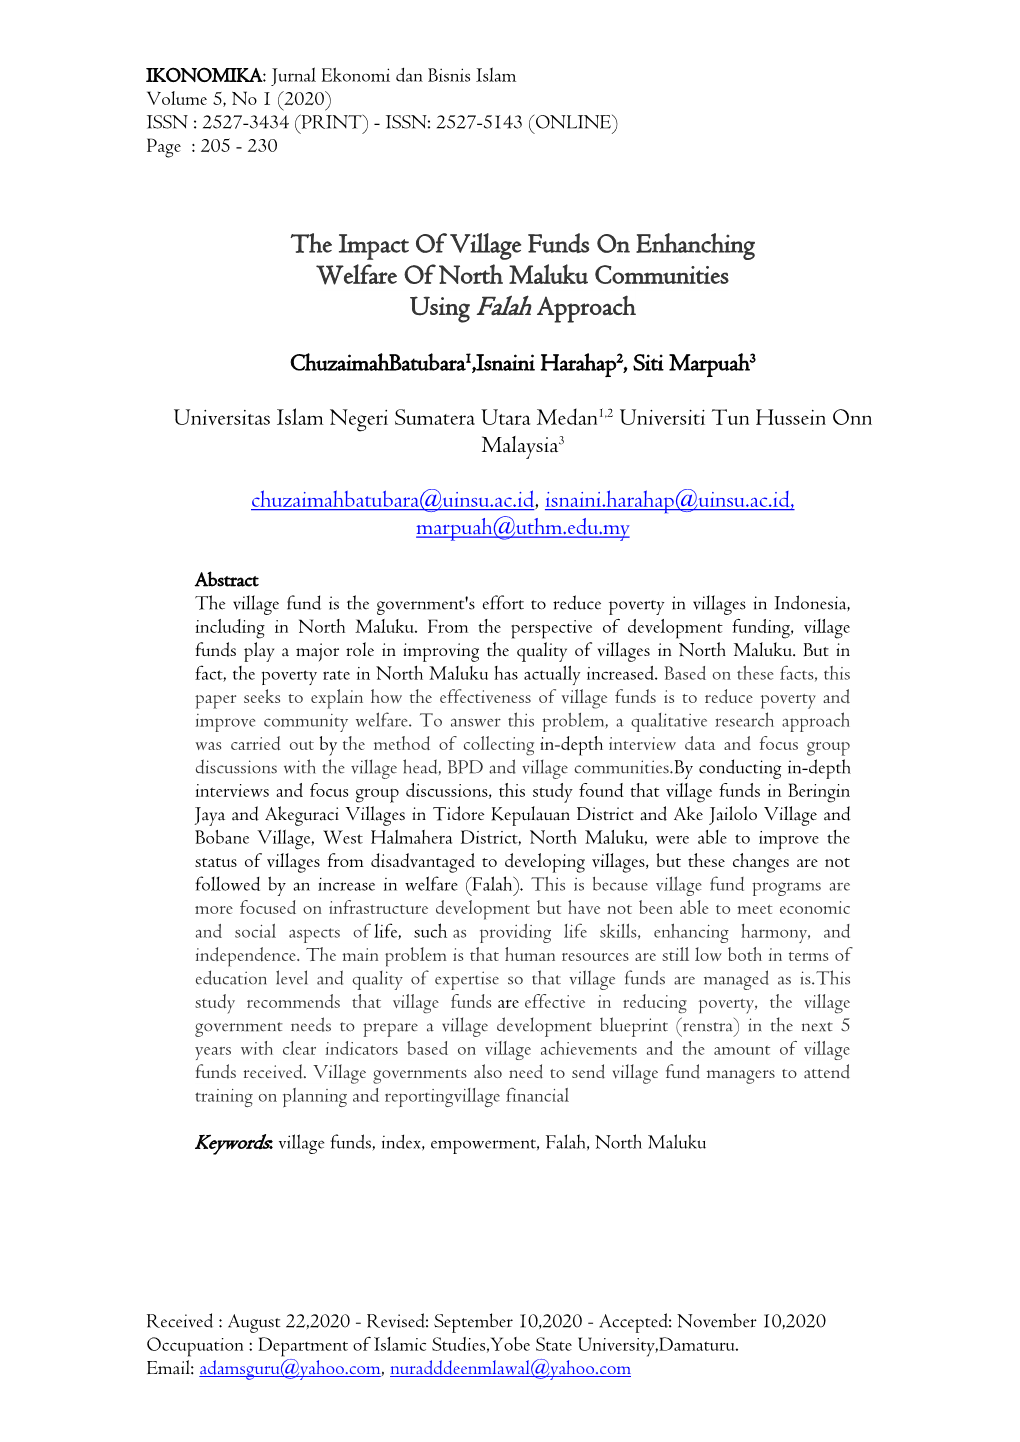 The Impact of Village Funds on Enhanching Welfare of North Maluku Communities Using Falah Approach